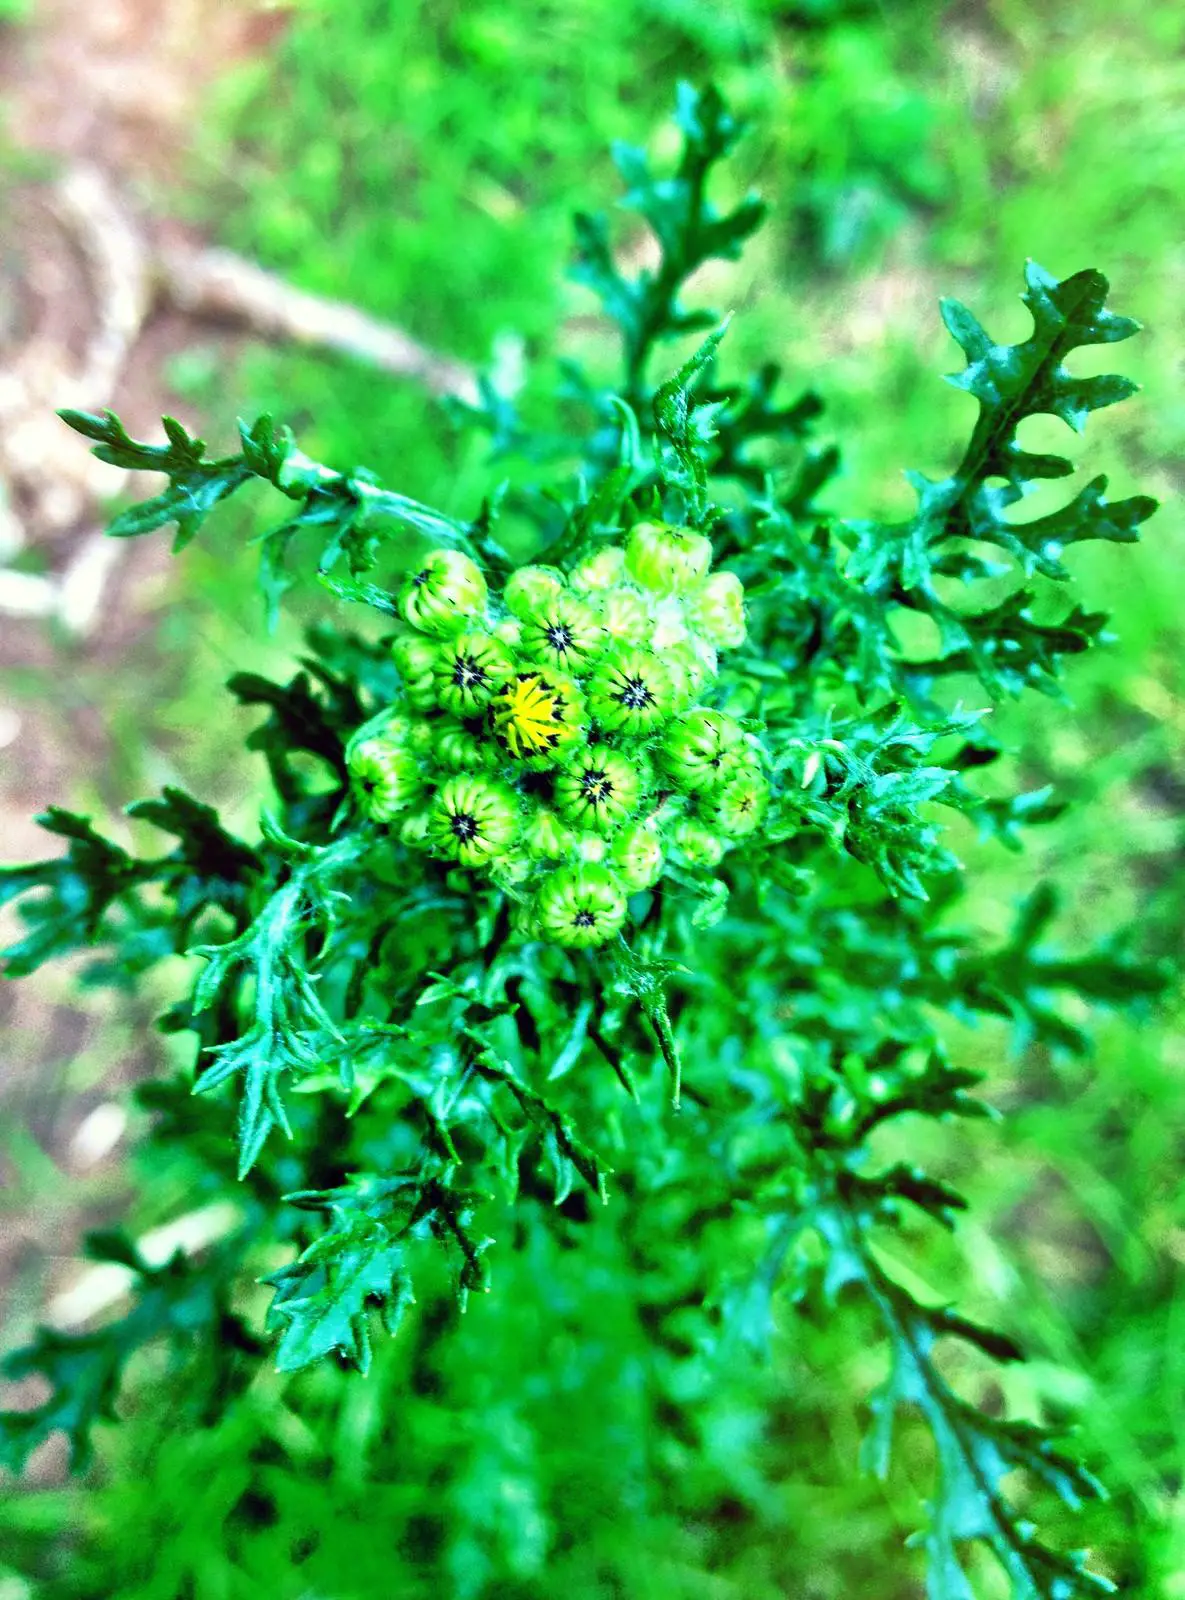 Ragwort leaves are hard to spot without their distinctive flowers